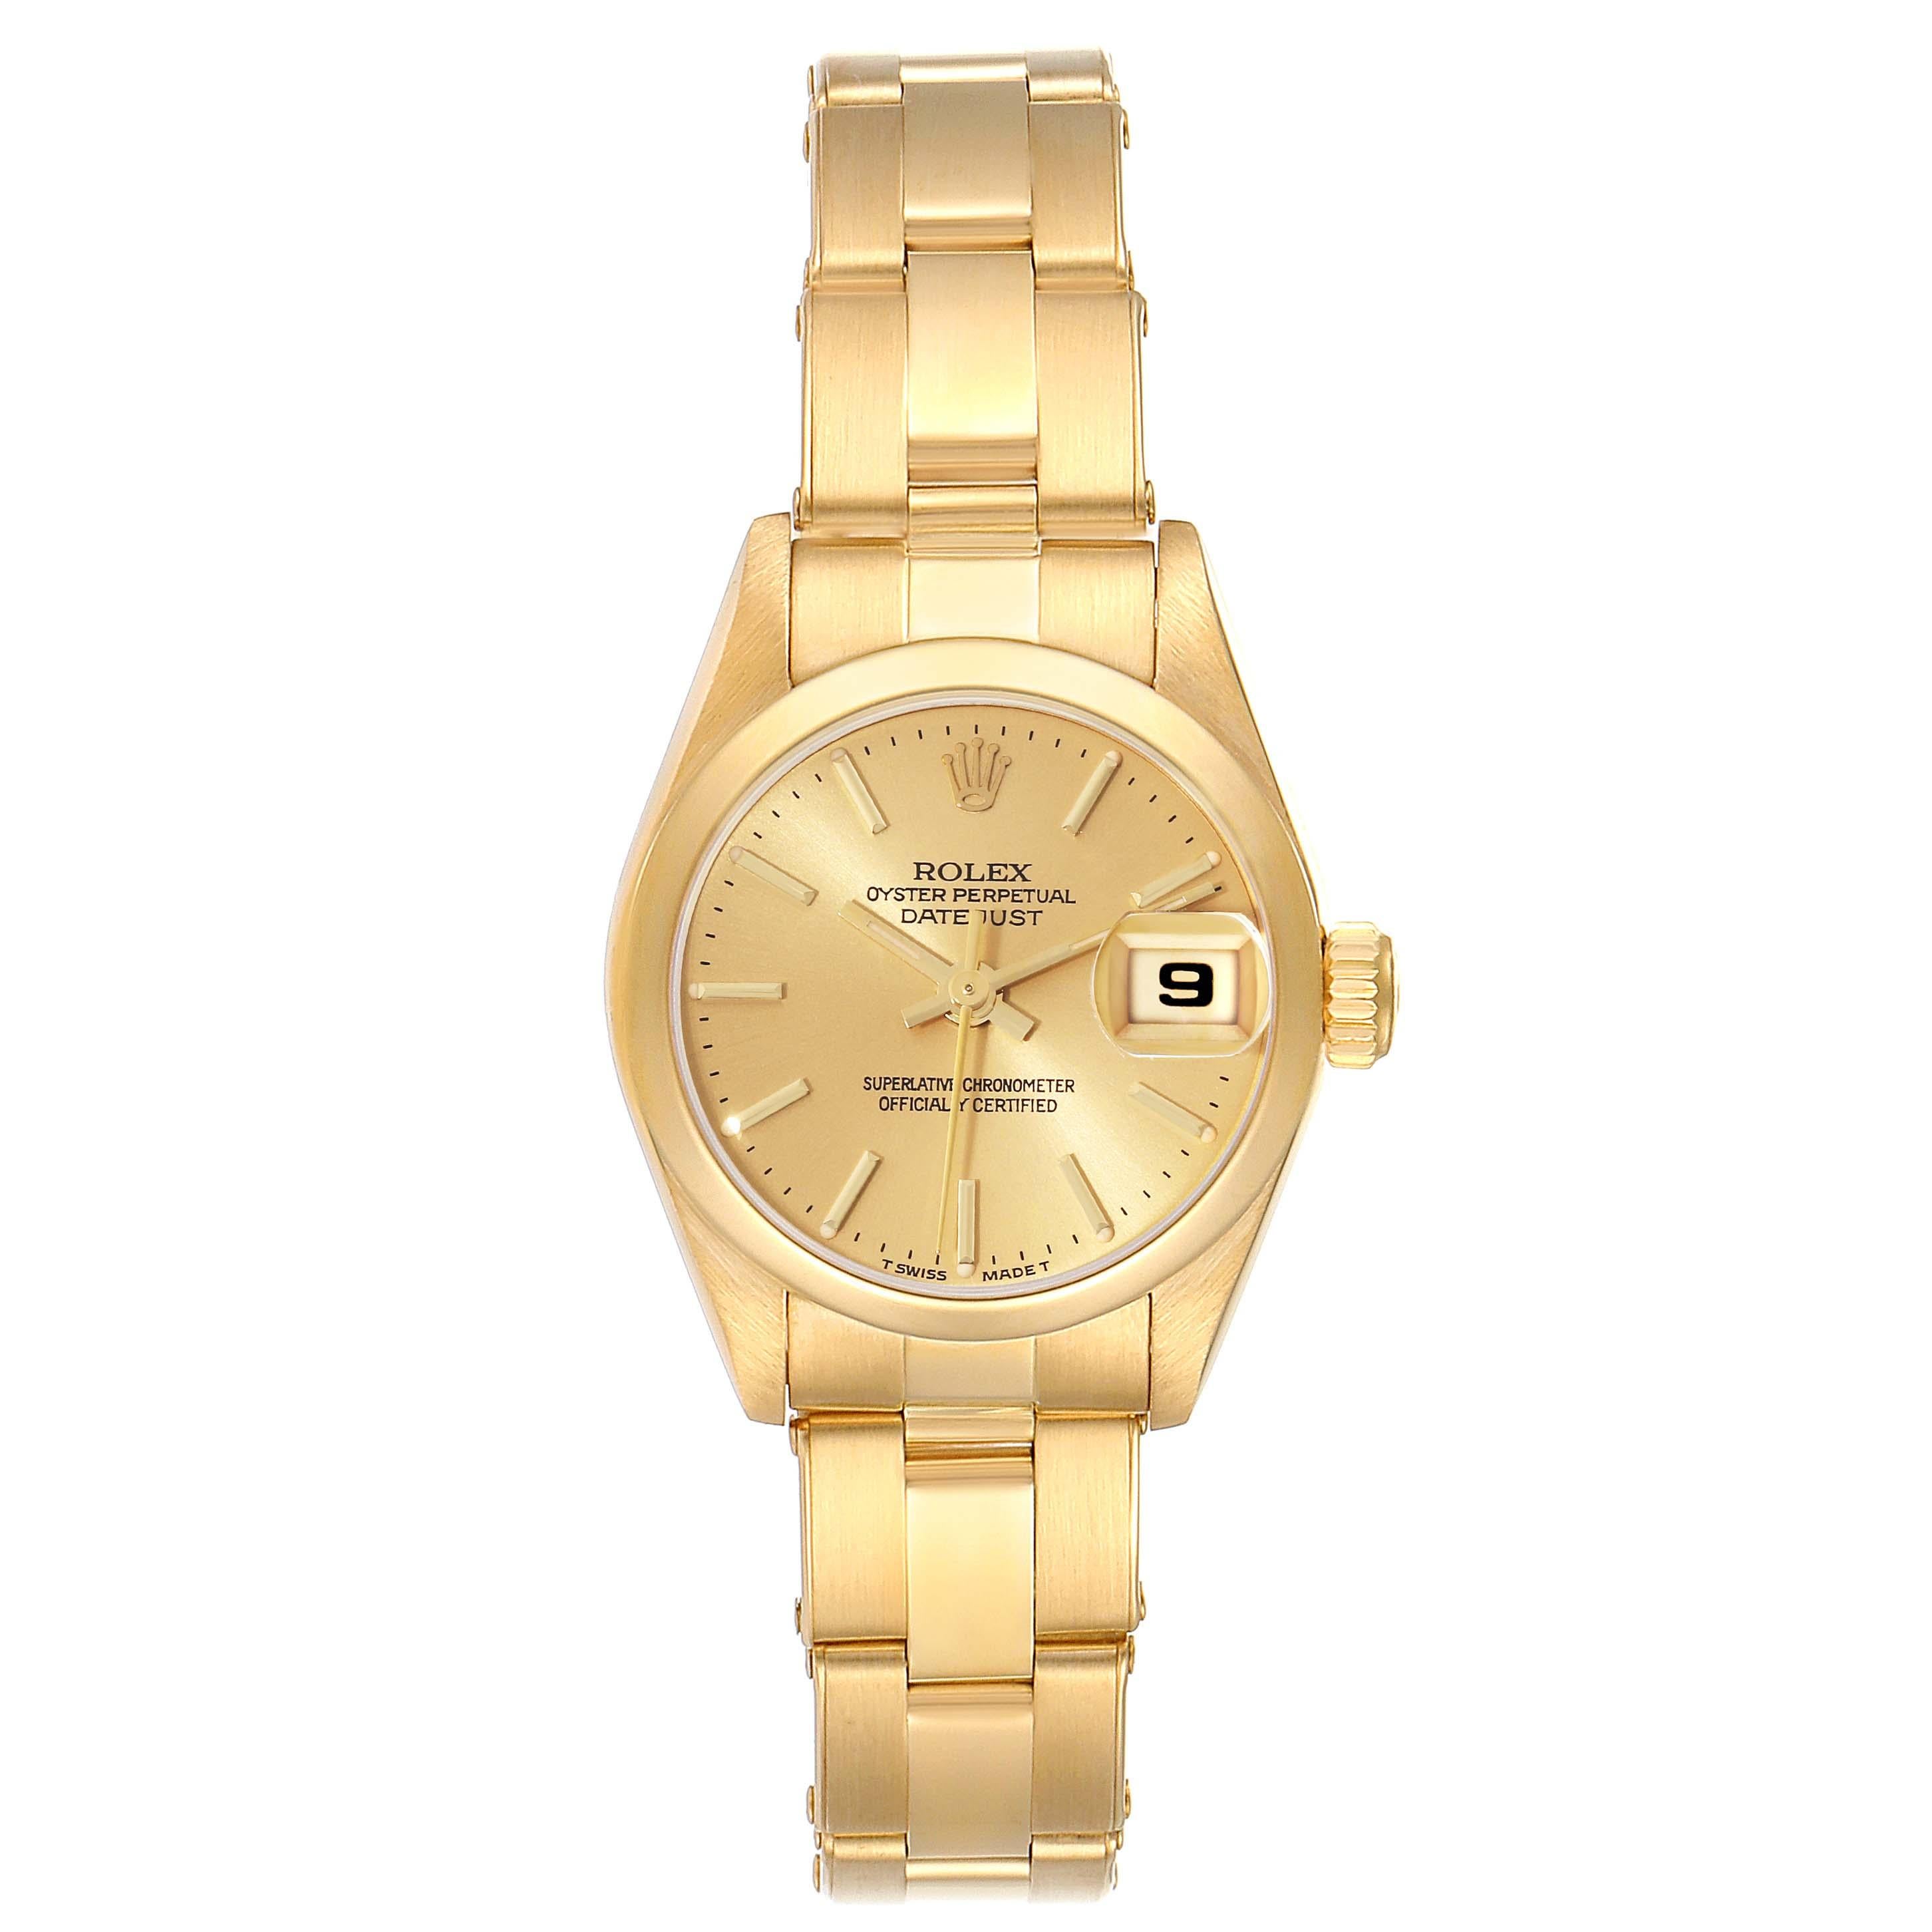 Rolex President Datejust Yellow Gold Ladies Watch 69168. Officially certified chronometer self-winding movement. 18k yellow gold oyster case 26.0 mm in diameter. Rolex logo on a crown. 18k yellow gold smooth bezel. Scratch resistant sapphire crystal